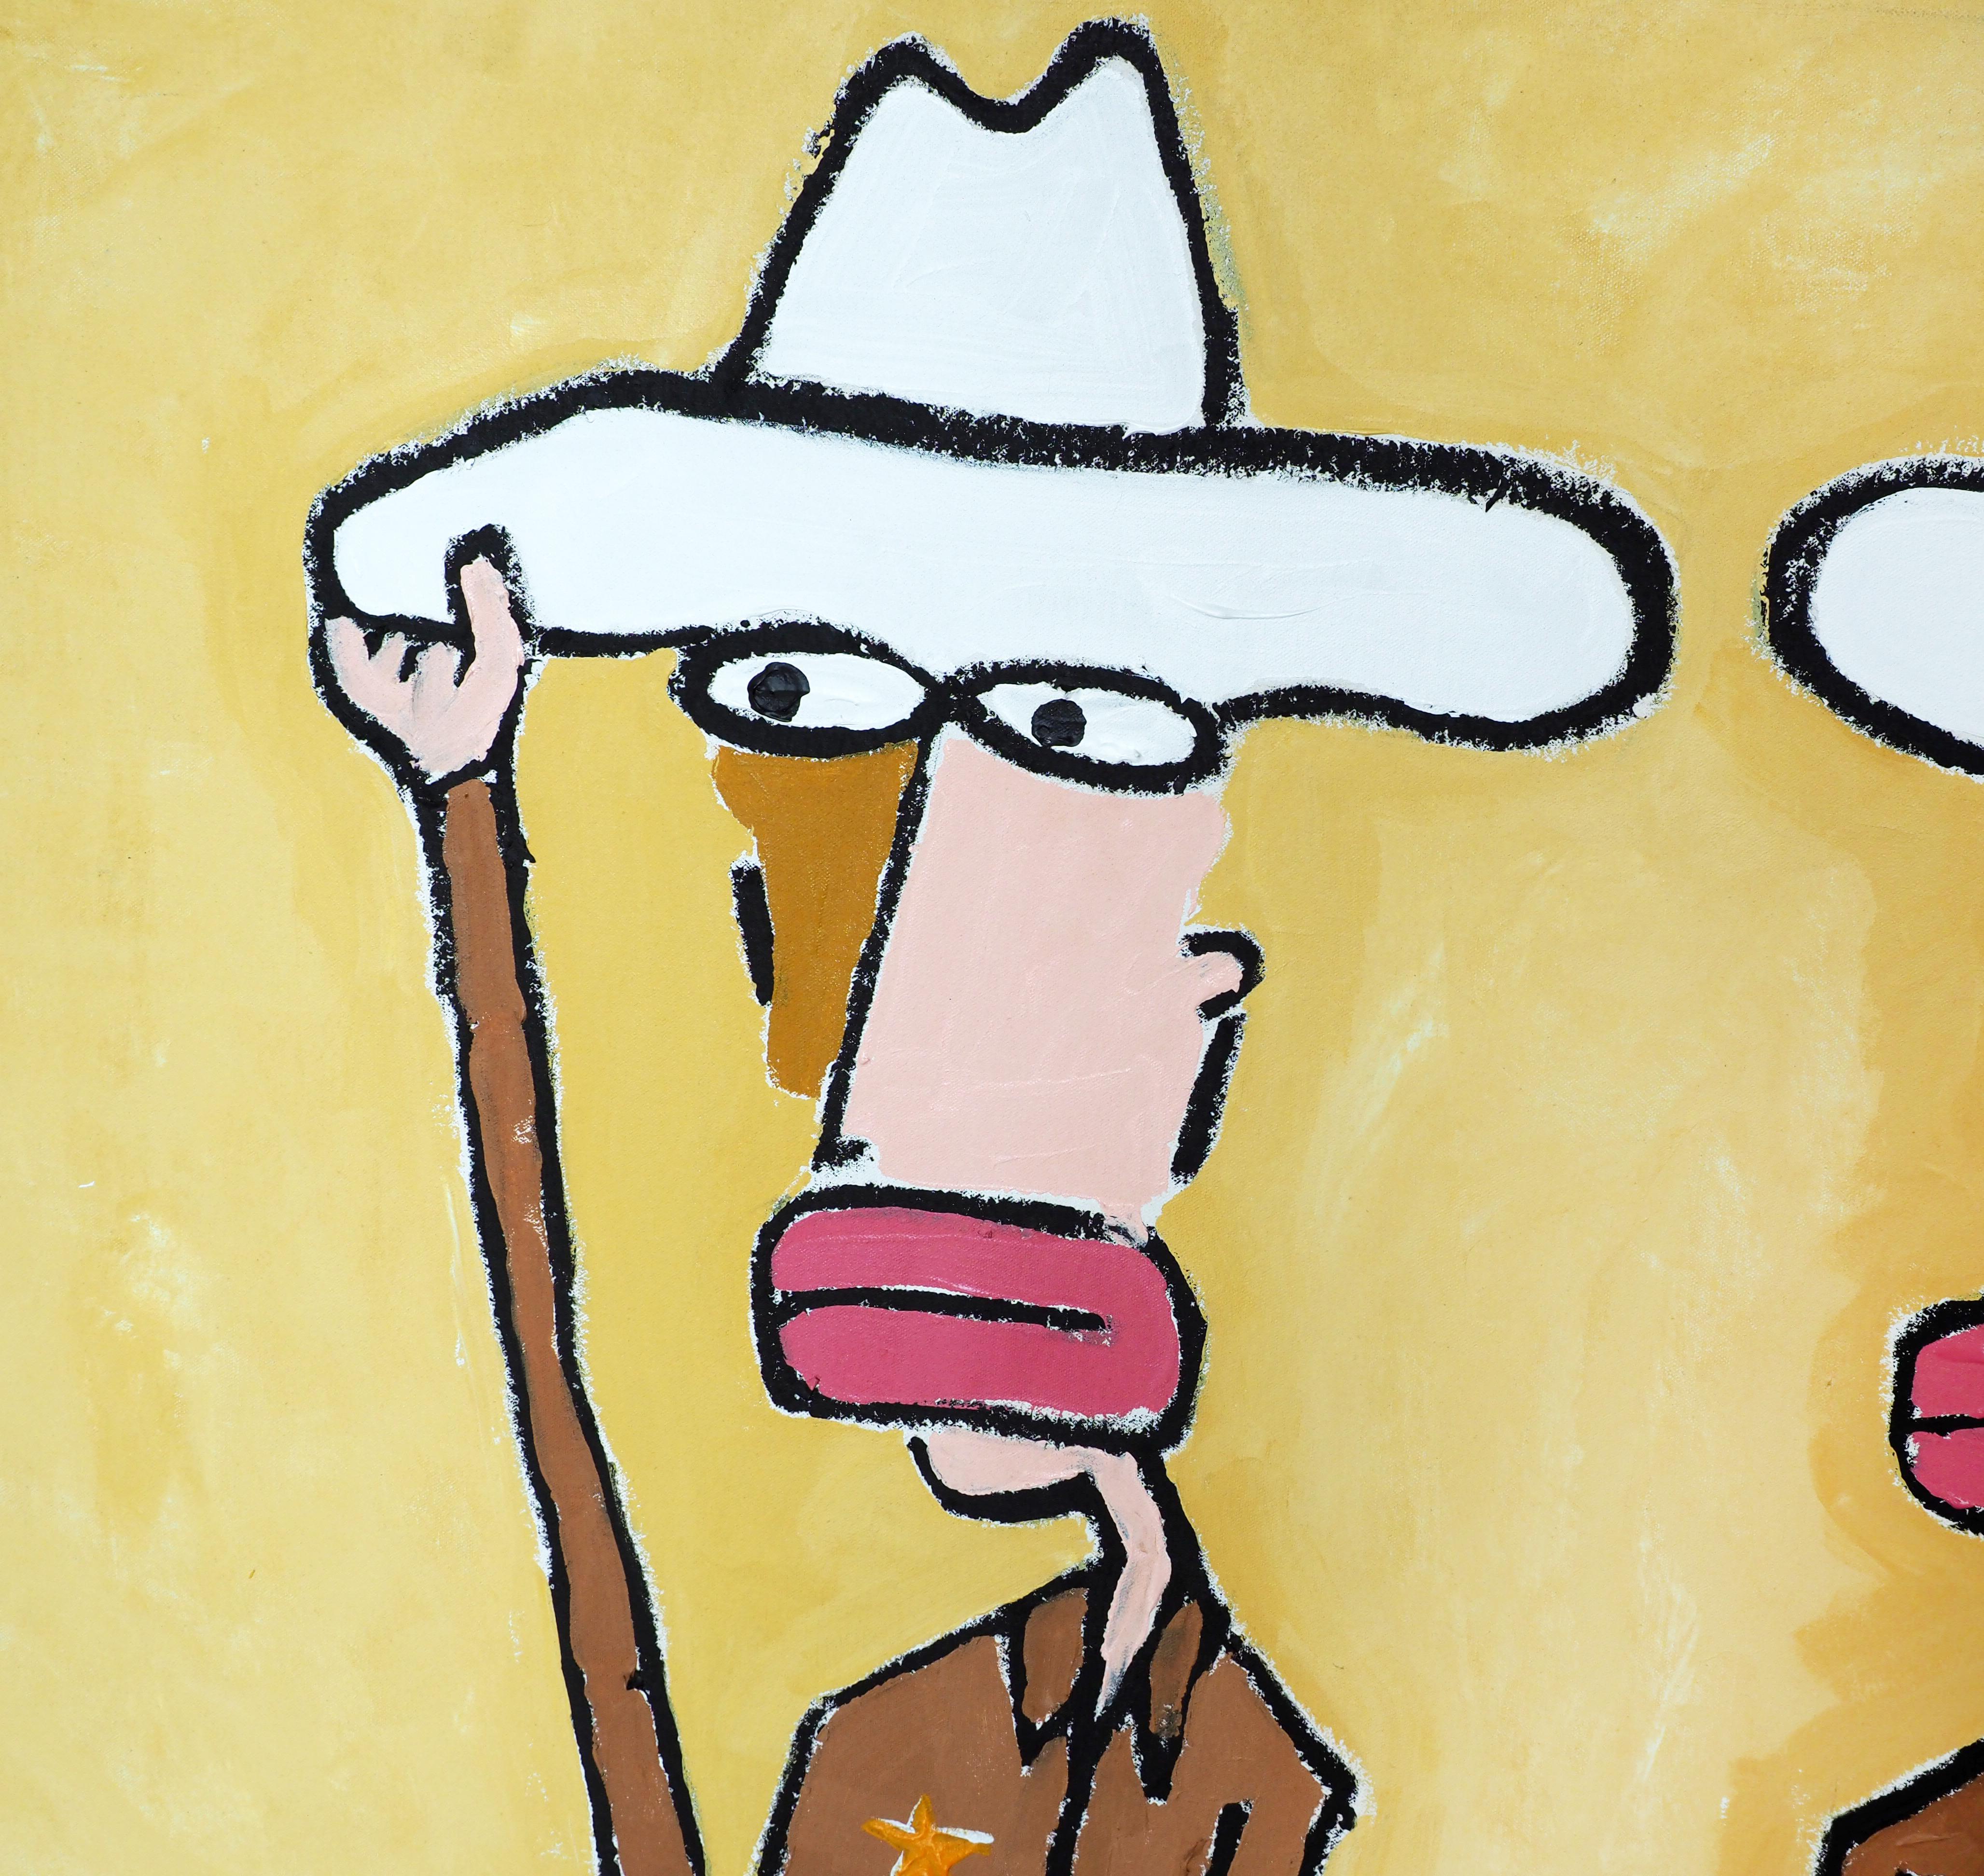 Tyler and I portrays two minimalistic characters of cowboys dressed in the same brown clothes and white hat. Although, they look similar, the character to the right has tears streaming down his face as he holds a cigarette in his hand. The white